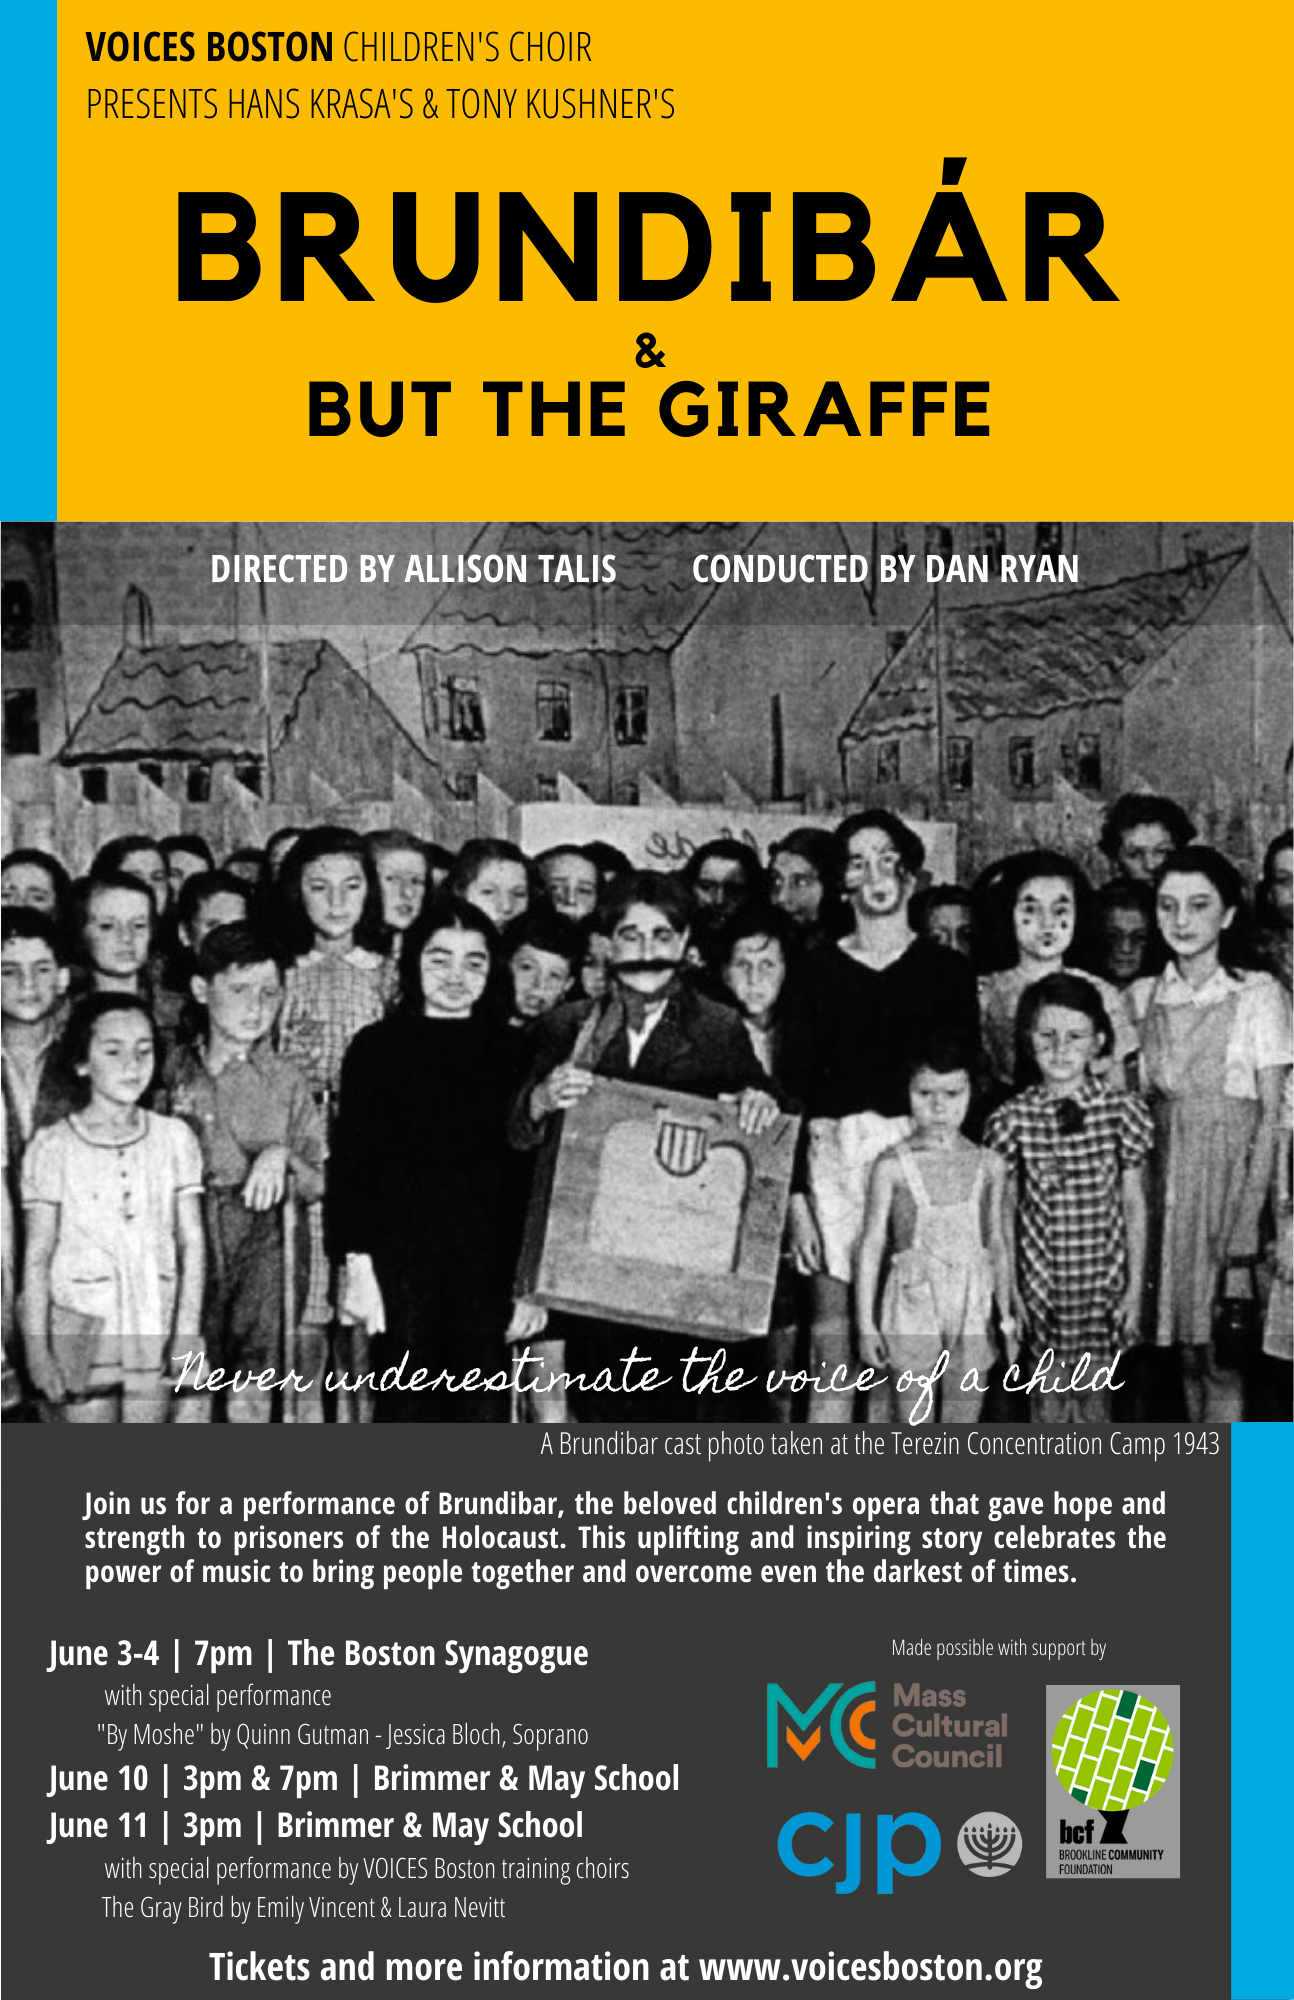 VOICES Boston Children’s Choir in a production of Brundibár written by Jewish Czech composer Hans Krása with a libretto by Adolf Hoffmeister. This children’s opera was first performed at an orphanage in Prague in 1942, though most of the early performances happened inside Terezin Concentration Camp during 1943-1944. The Nazi’s famously featured a performance of Brundibár during the International Red Cross inspection in September of 1944 after realizing the propaganda potential of this work. Two weeks after this final performance, deportations to Auschwitz escalated and ultimately most of the adults and children involved in Brundibár were killed. 